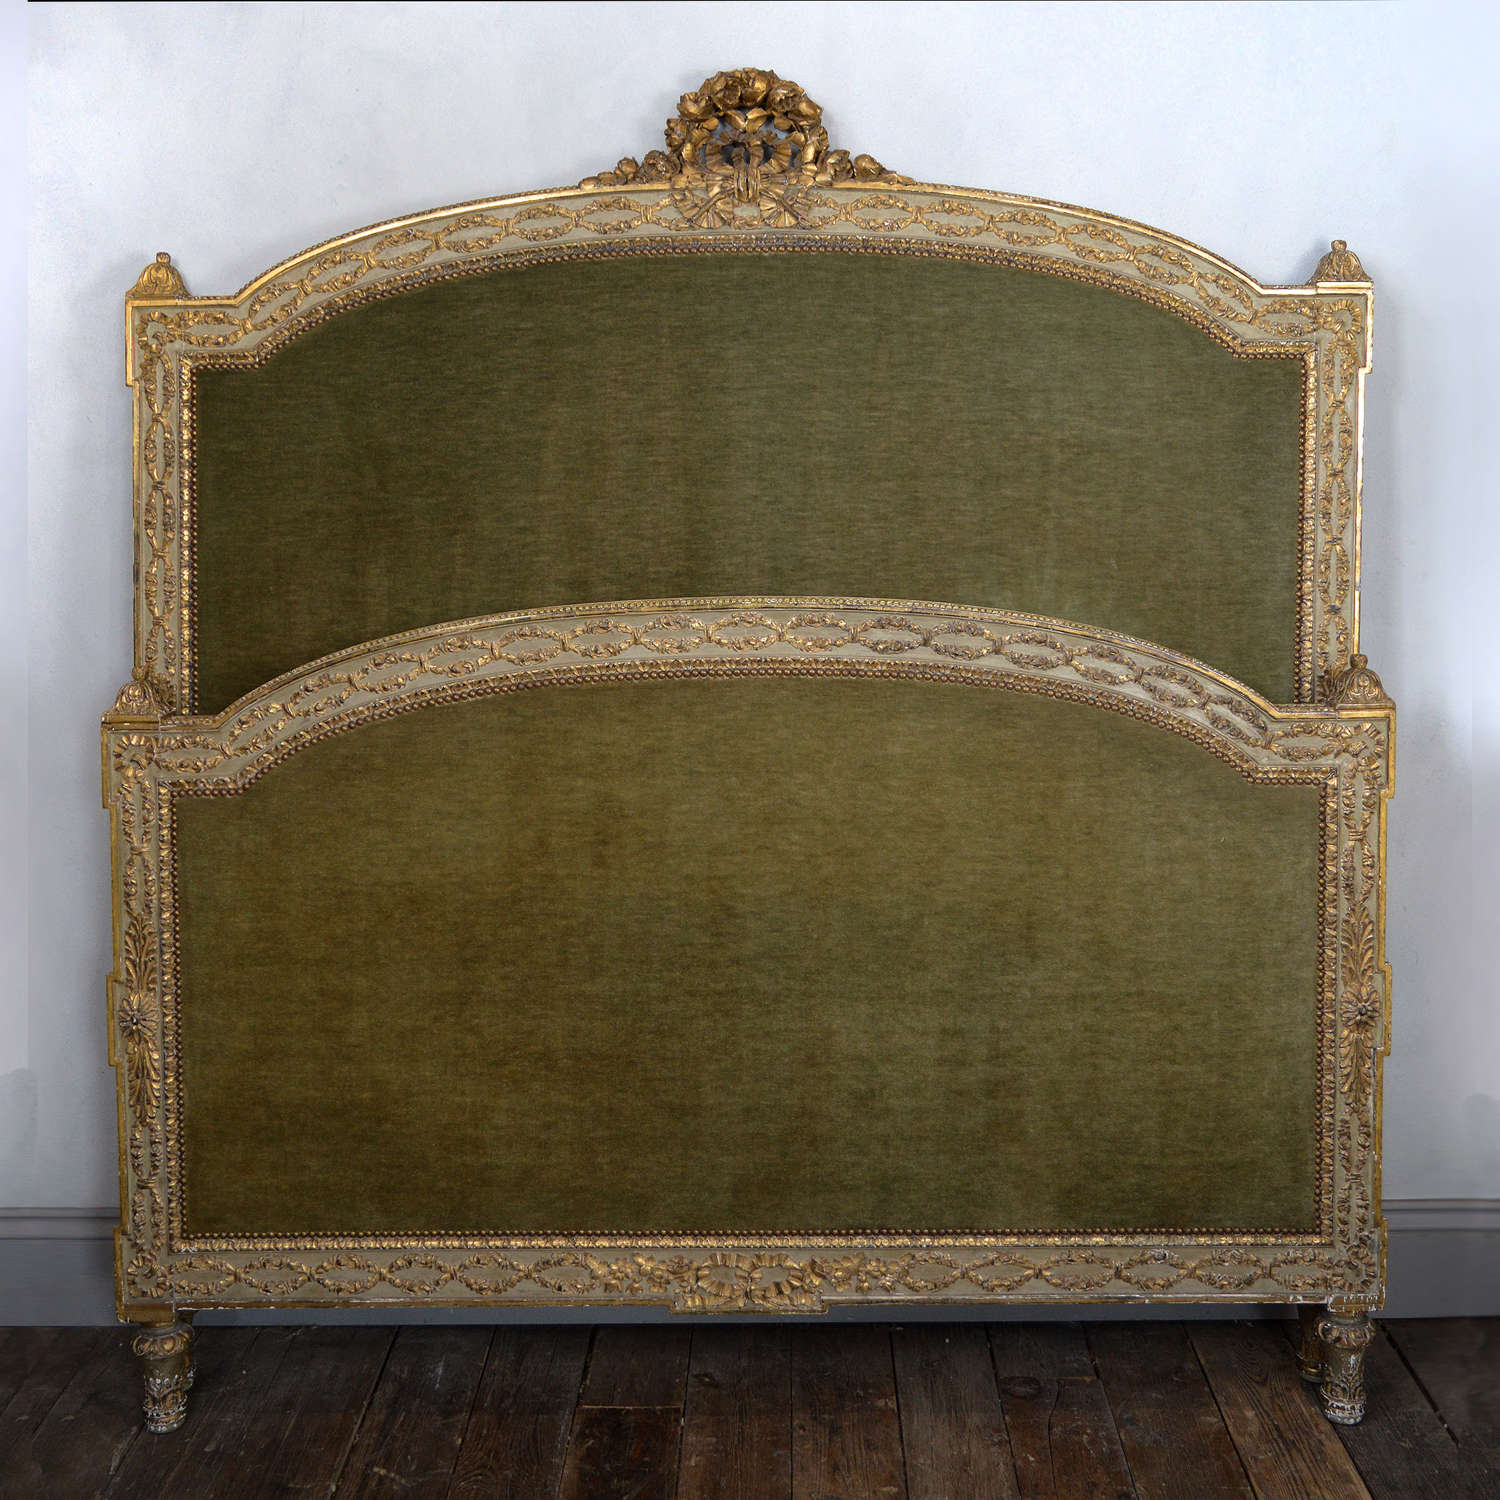 Rare Quality 19th Century Louis XVI style King-size giltwood bedstead